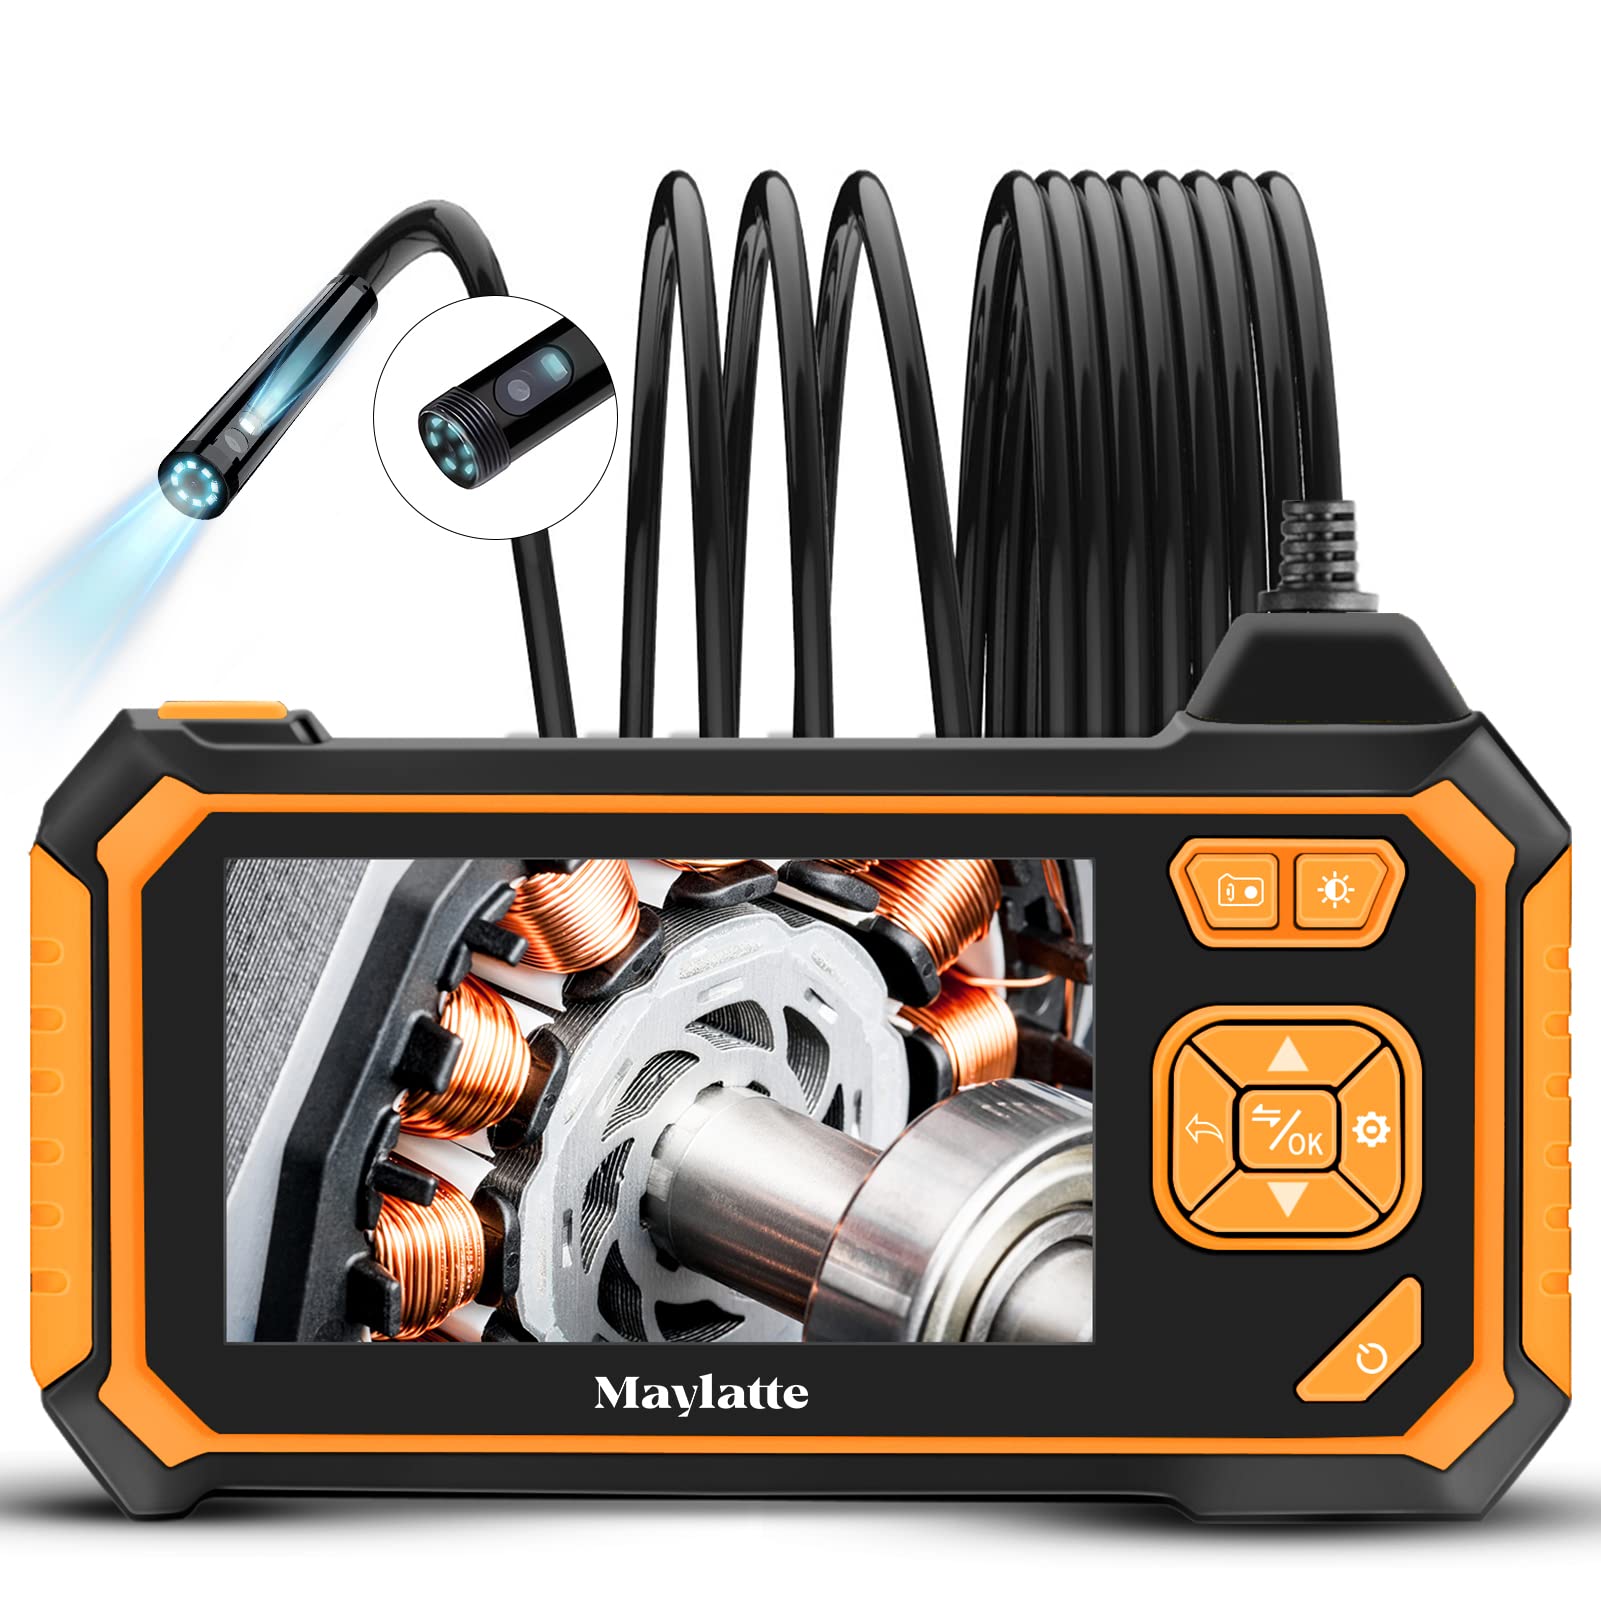 Maylatte Dual Lens Endoscope: 4.3 Inch 1080P HD Borescope with IP67 Waterproof Inspection Camera, 8 LED Lights, and 32GB Card